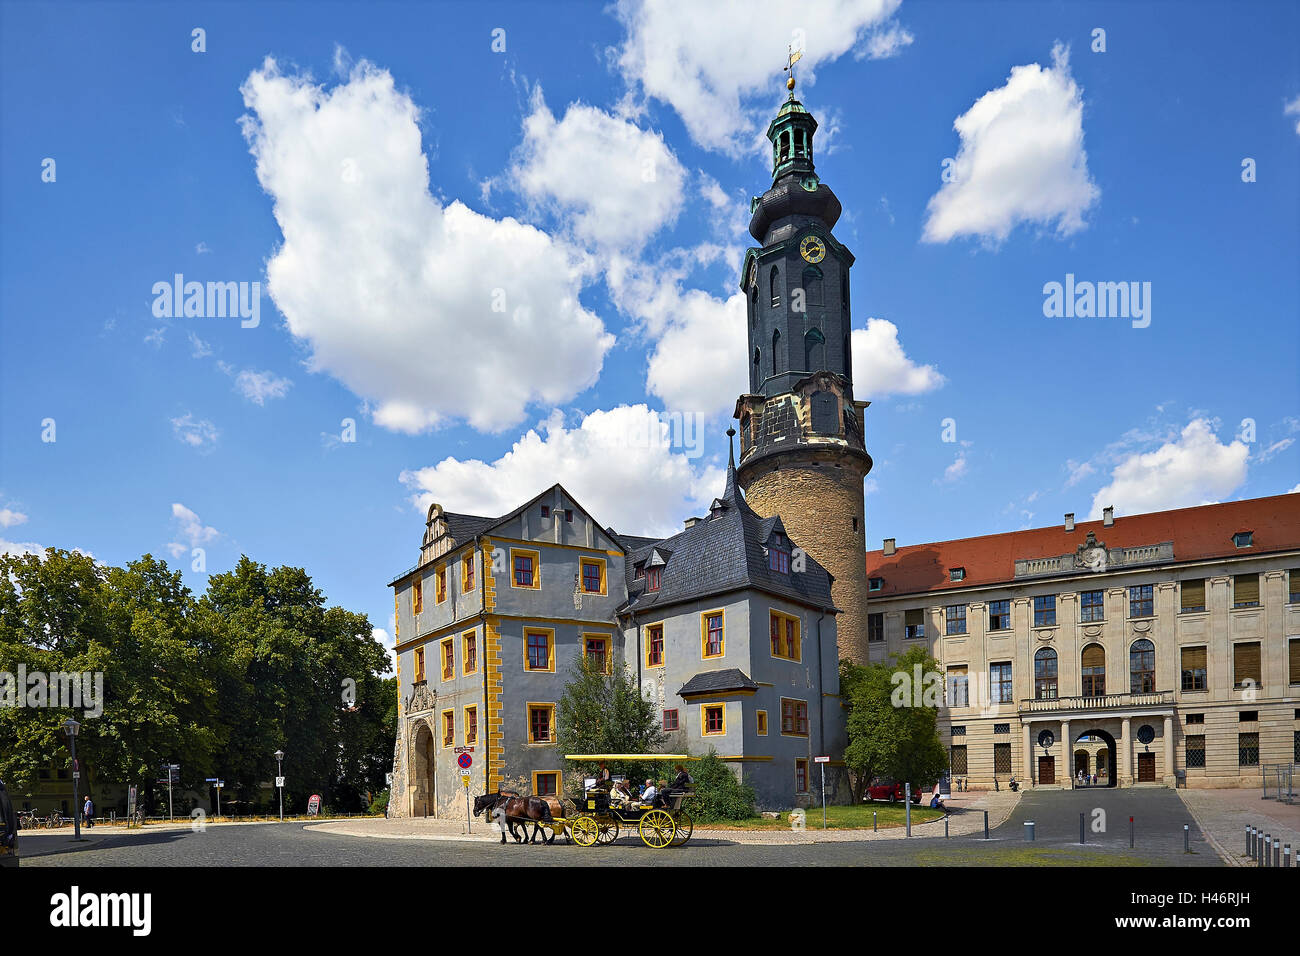 Royal Palace in Weimar, Thuringia, Germany Stock Photo